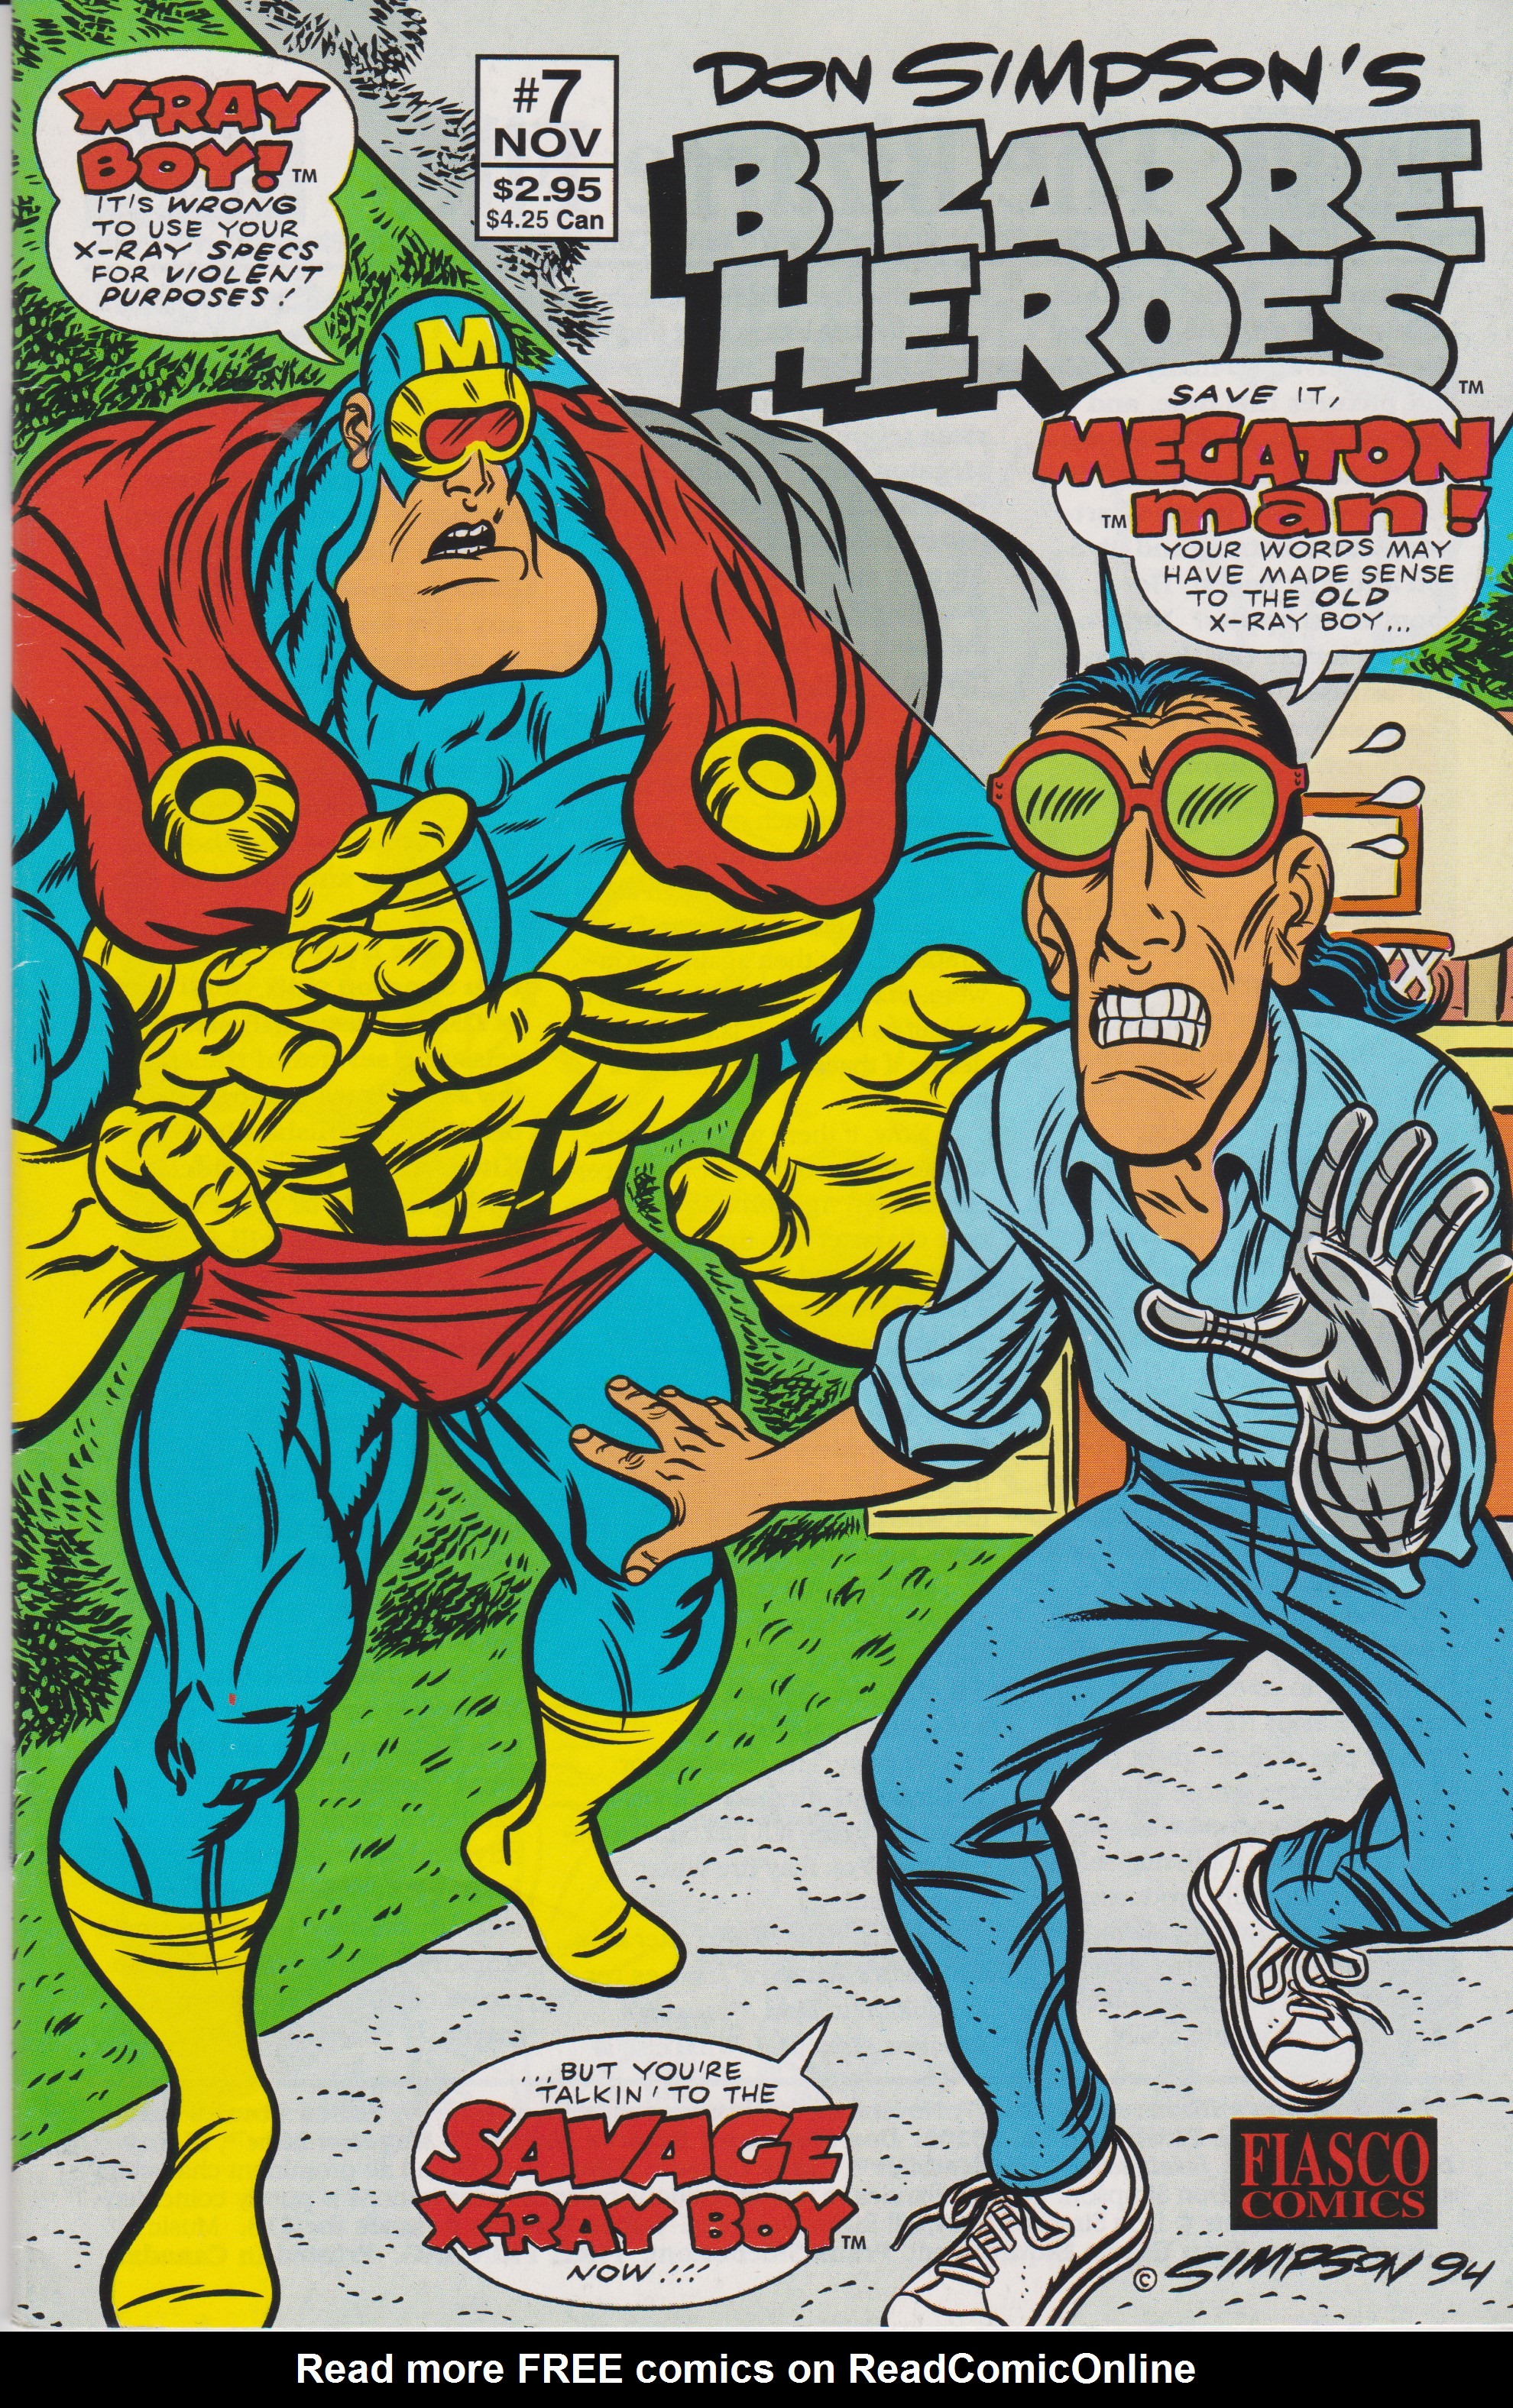 Read online Don Simpson's Bizarre Heroes comic -  Issue #7 - 1